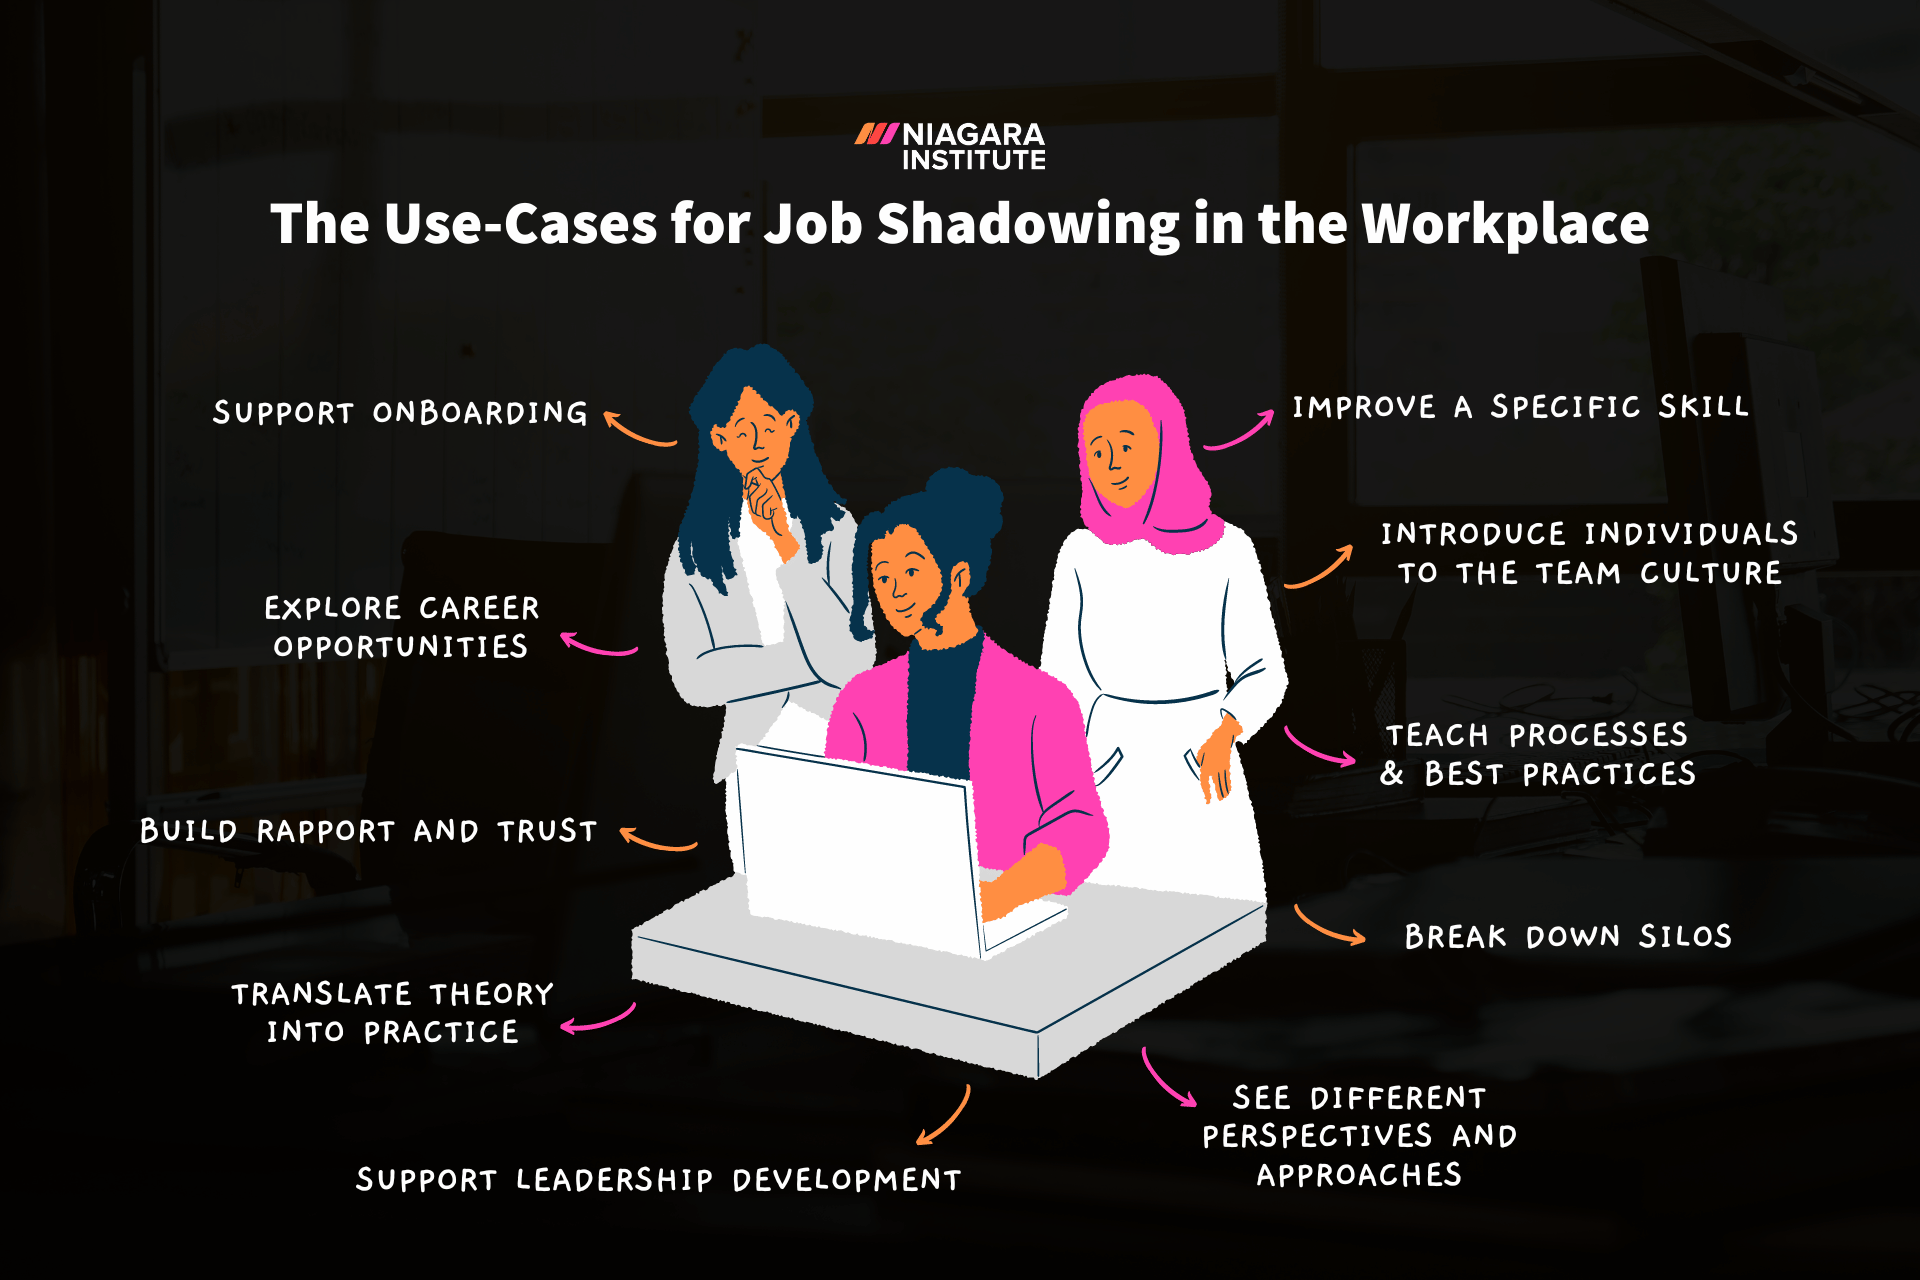 The Use-Cases for Job Shadowing in the Workplace - Niagara Institute